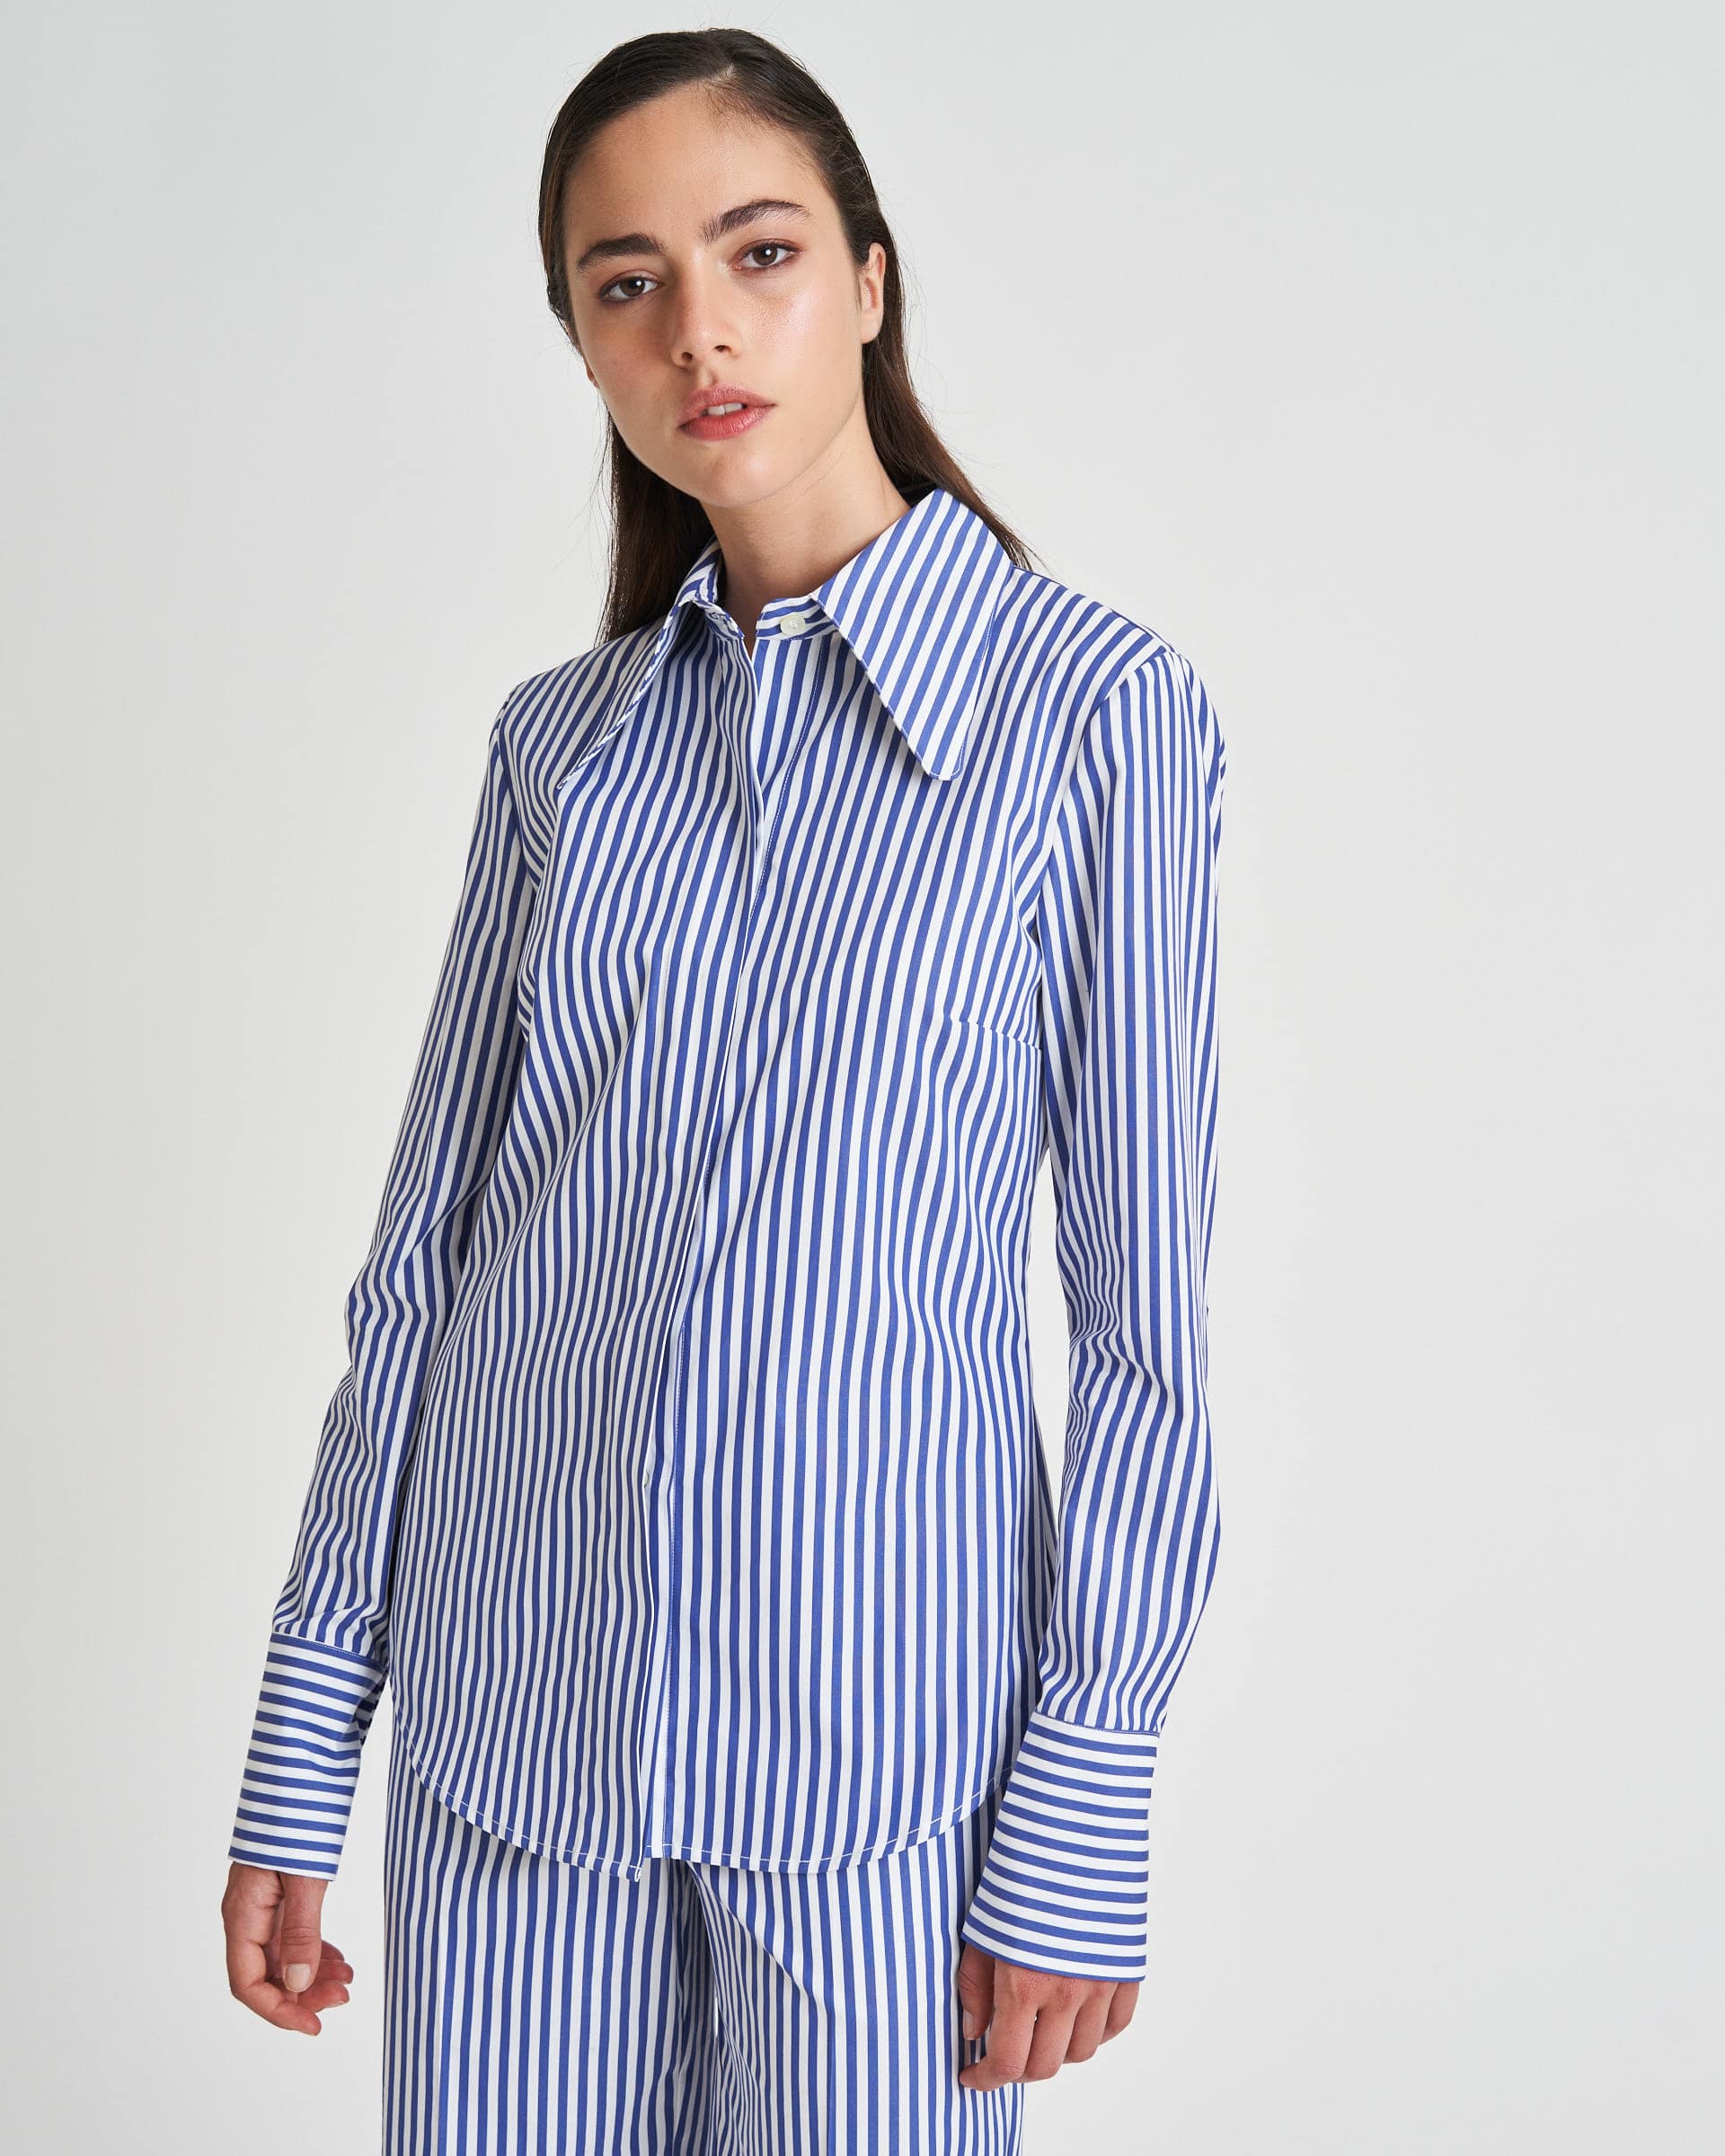 The Market Store | Striped Shirt